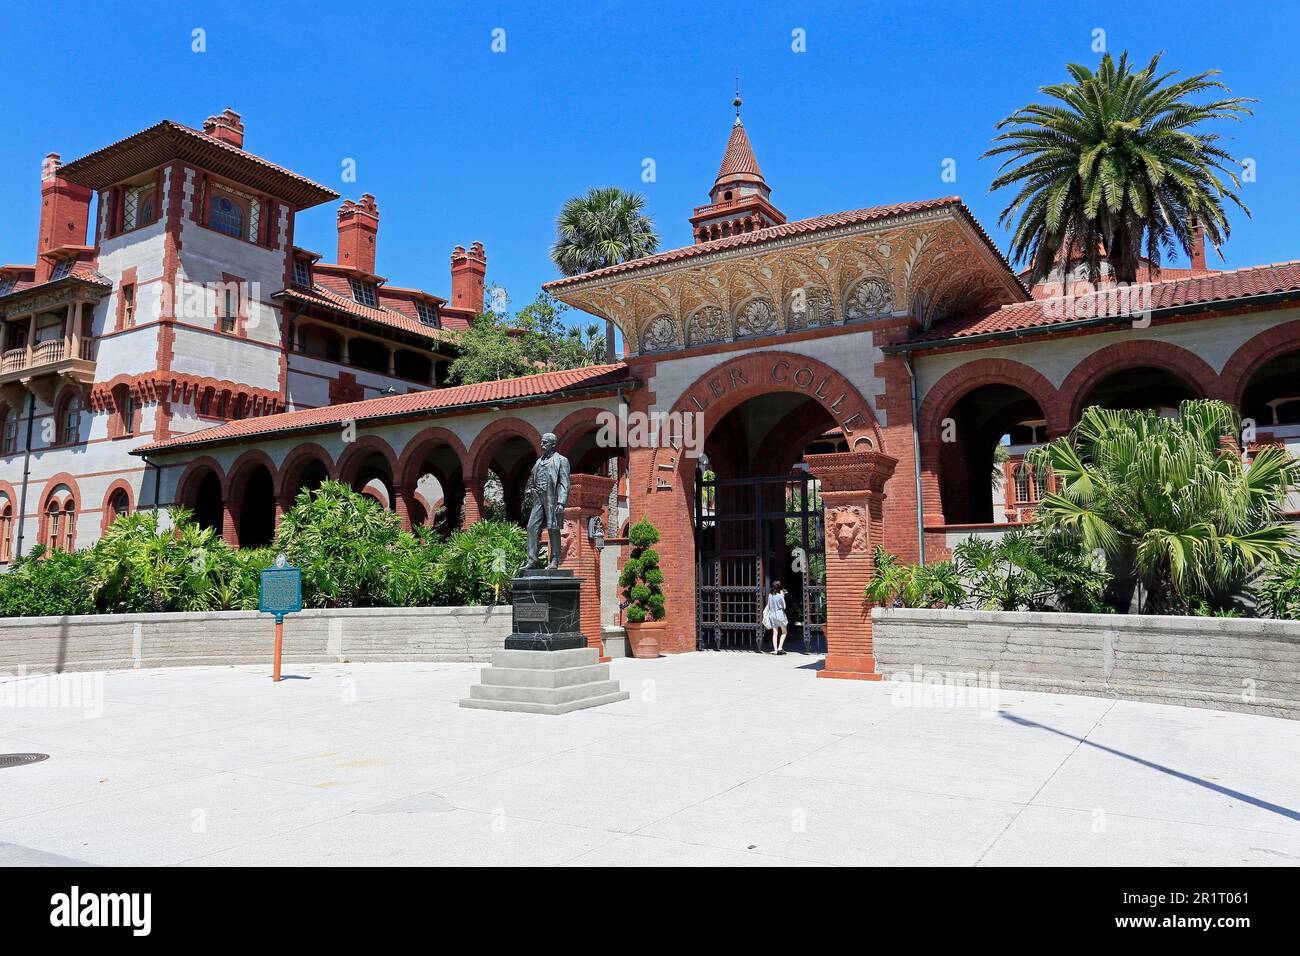 Flagler College, St. Augustine, Florida, USA, st augustine, saint augustine, street, old town, town, street, streets, tourists, attractions Stock Photo